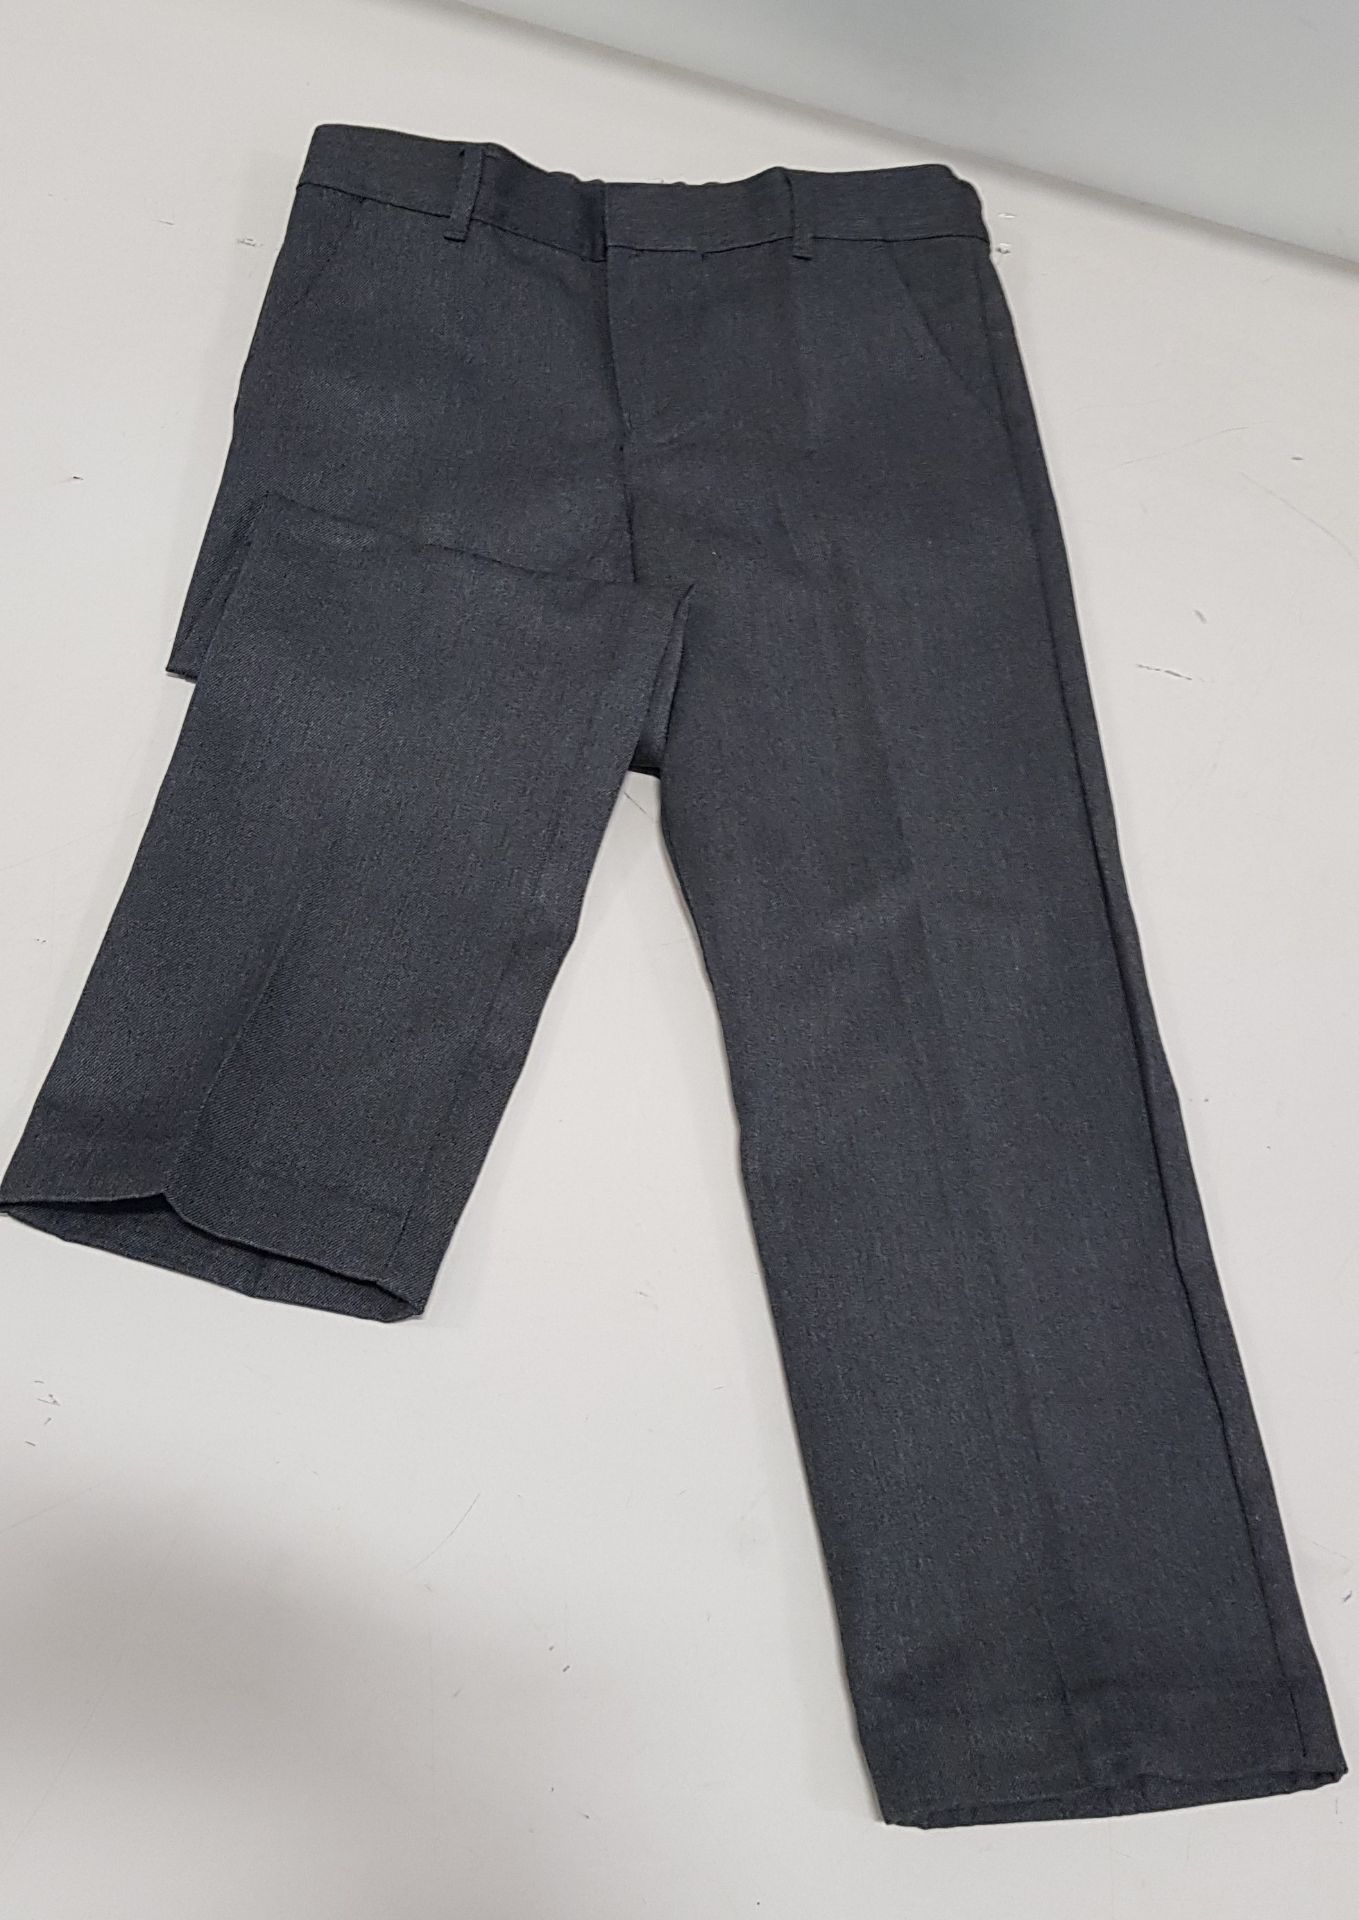 60 X BRAND NEW F&F PACKS OF 2 PLUS FIT BOYS TROUSERS ALL IN GREY IN SIZES ( 6-7 TO 10-11 ) ( RRP £